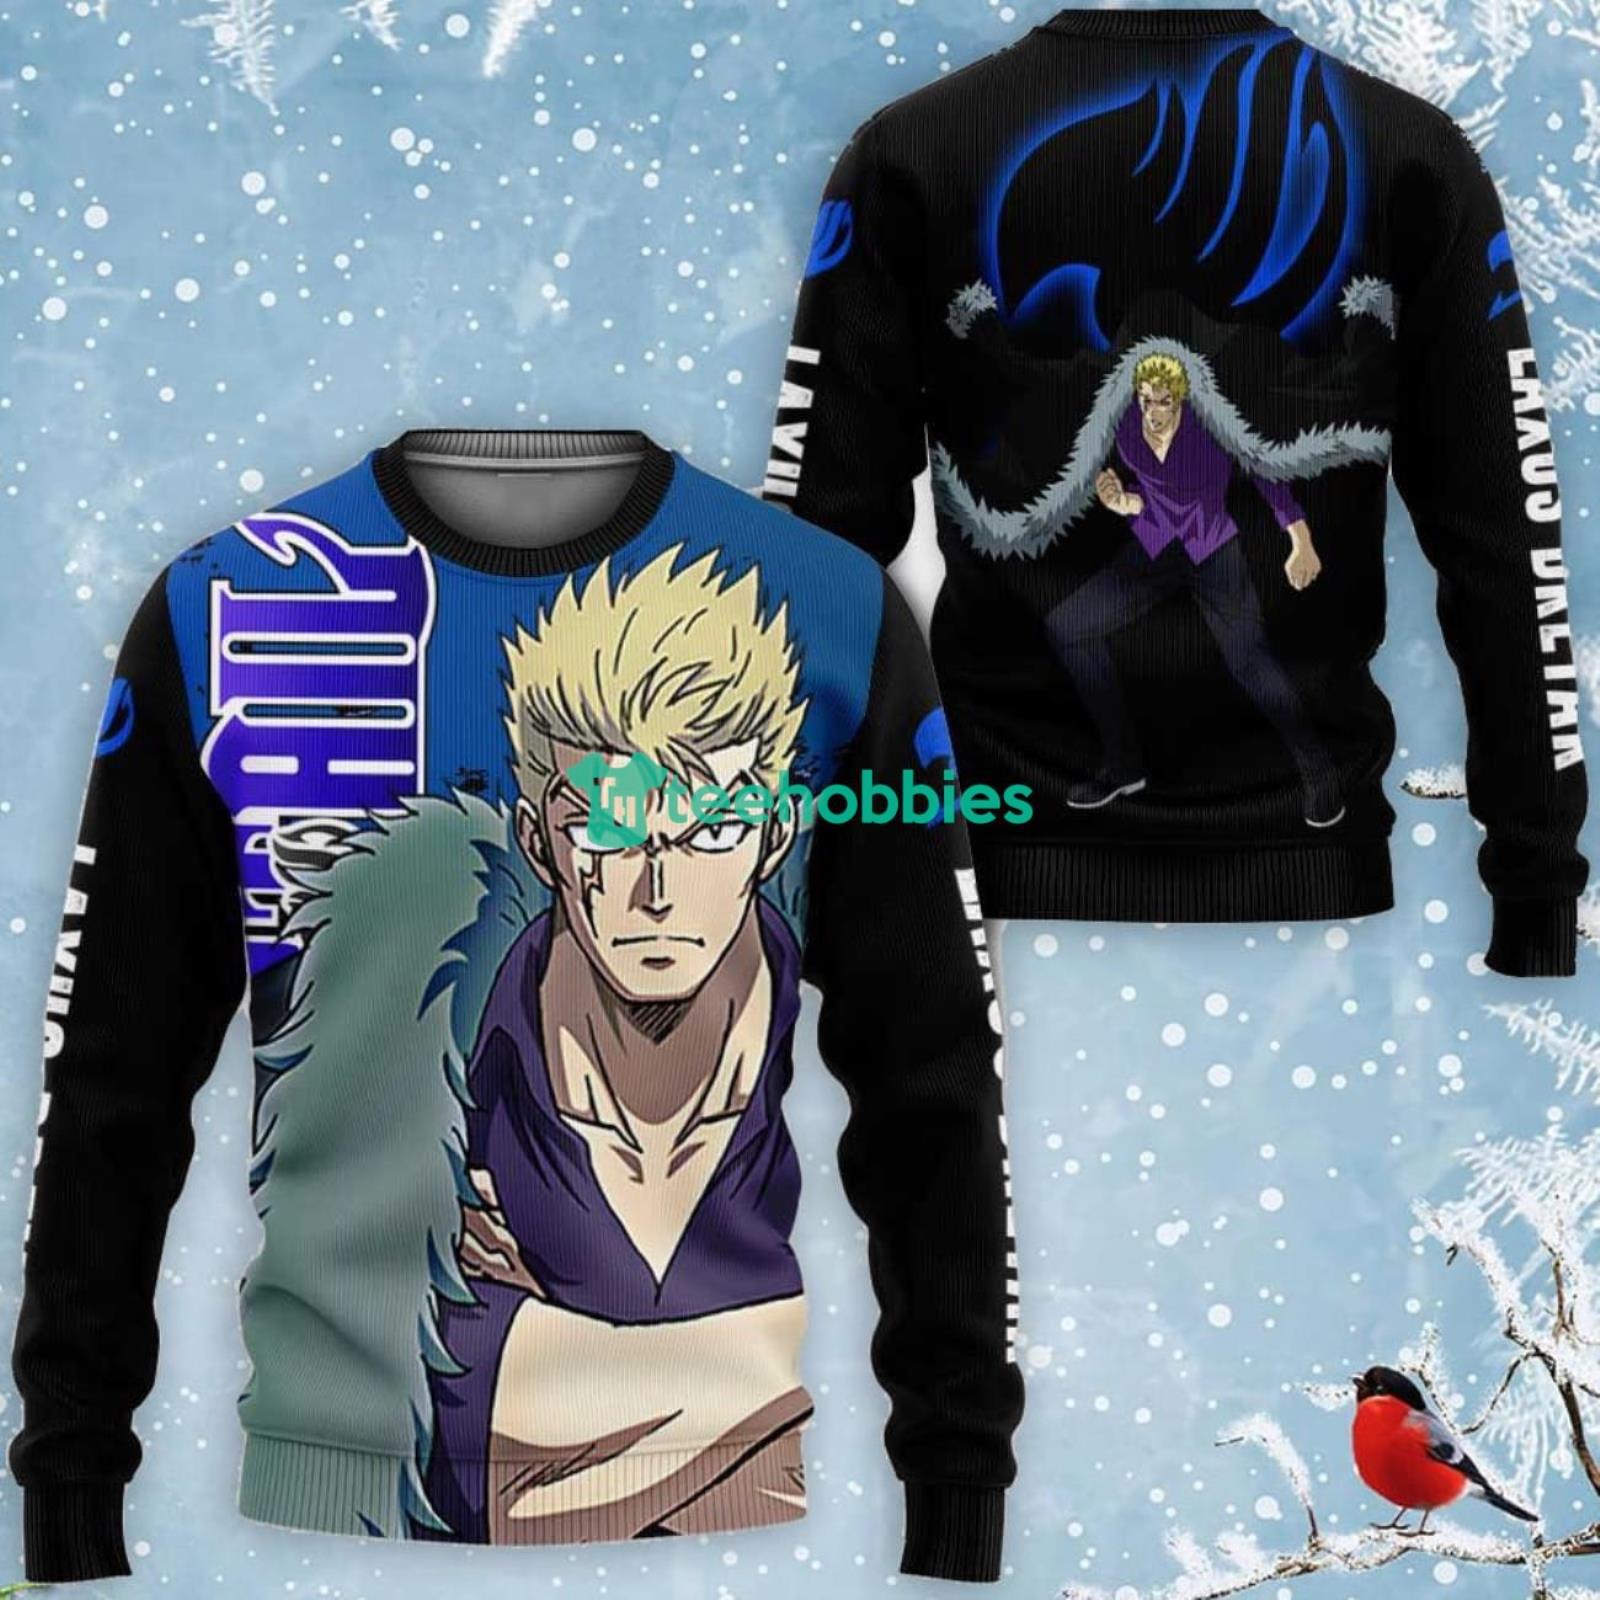 Laxus Dreyar All Over Printed 3D Shirt Fairy Tail Anime Fans Product Photo 2 Product photo 2